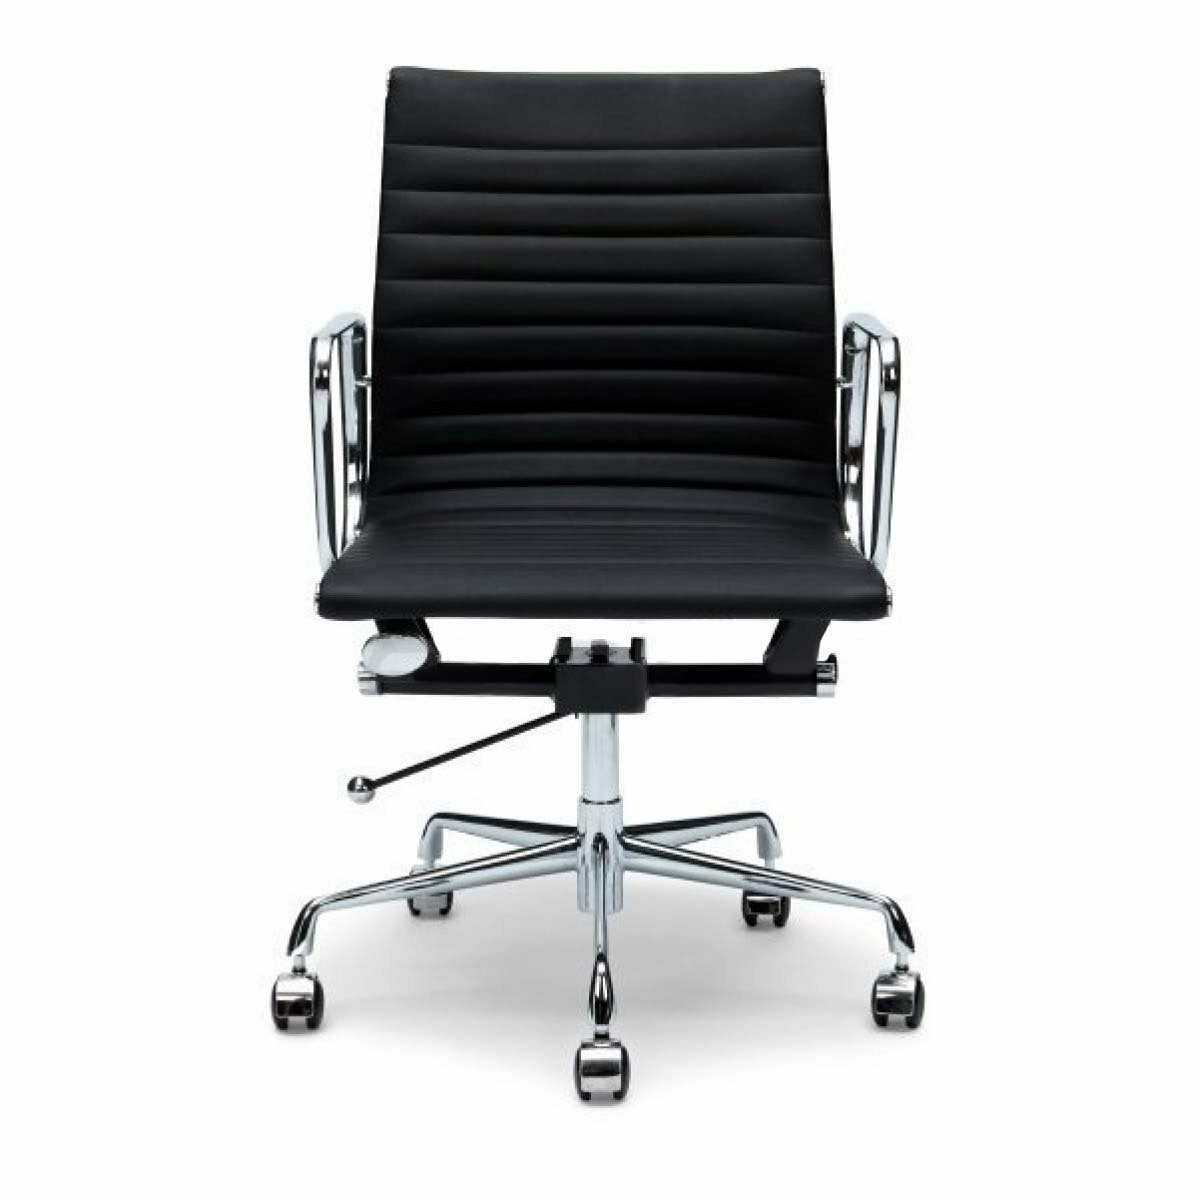 Floyd Leather Low Back Office Chair – Black